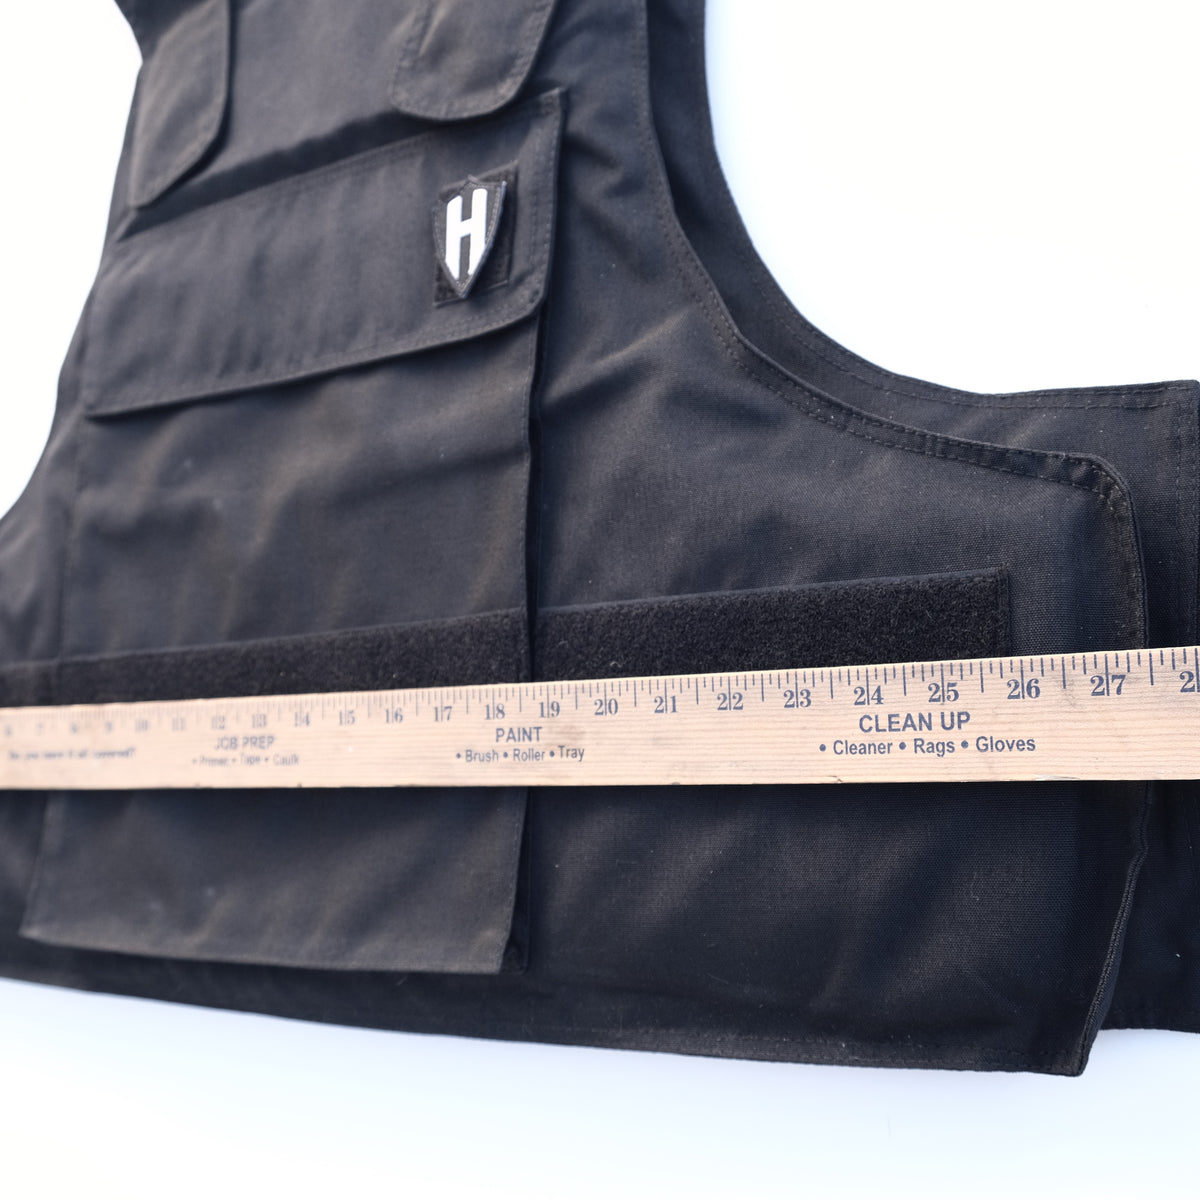 Larger sizes available for Level 3A vests & t-shirts – Hudi's Tactical